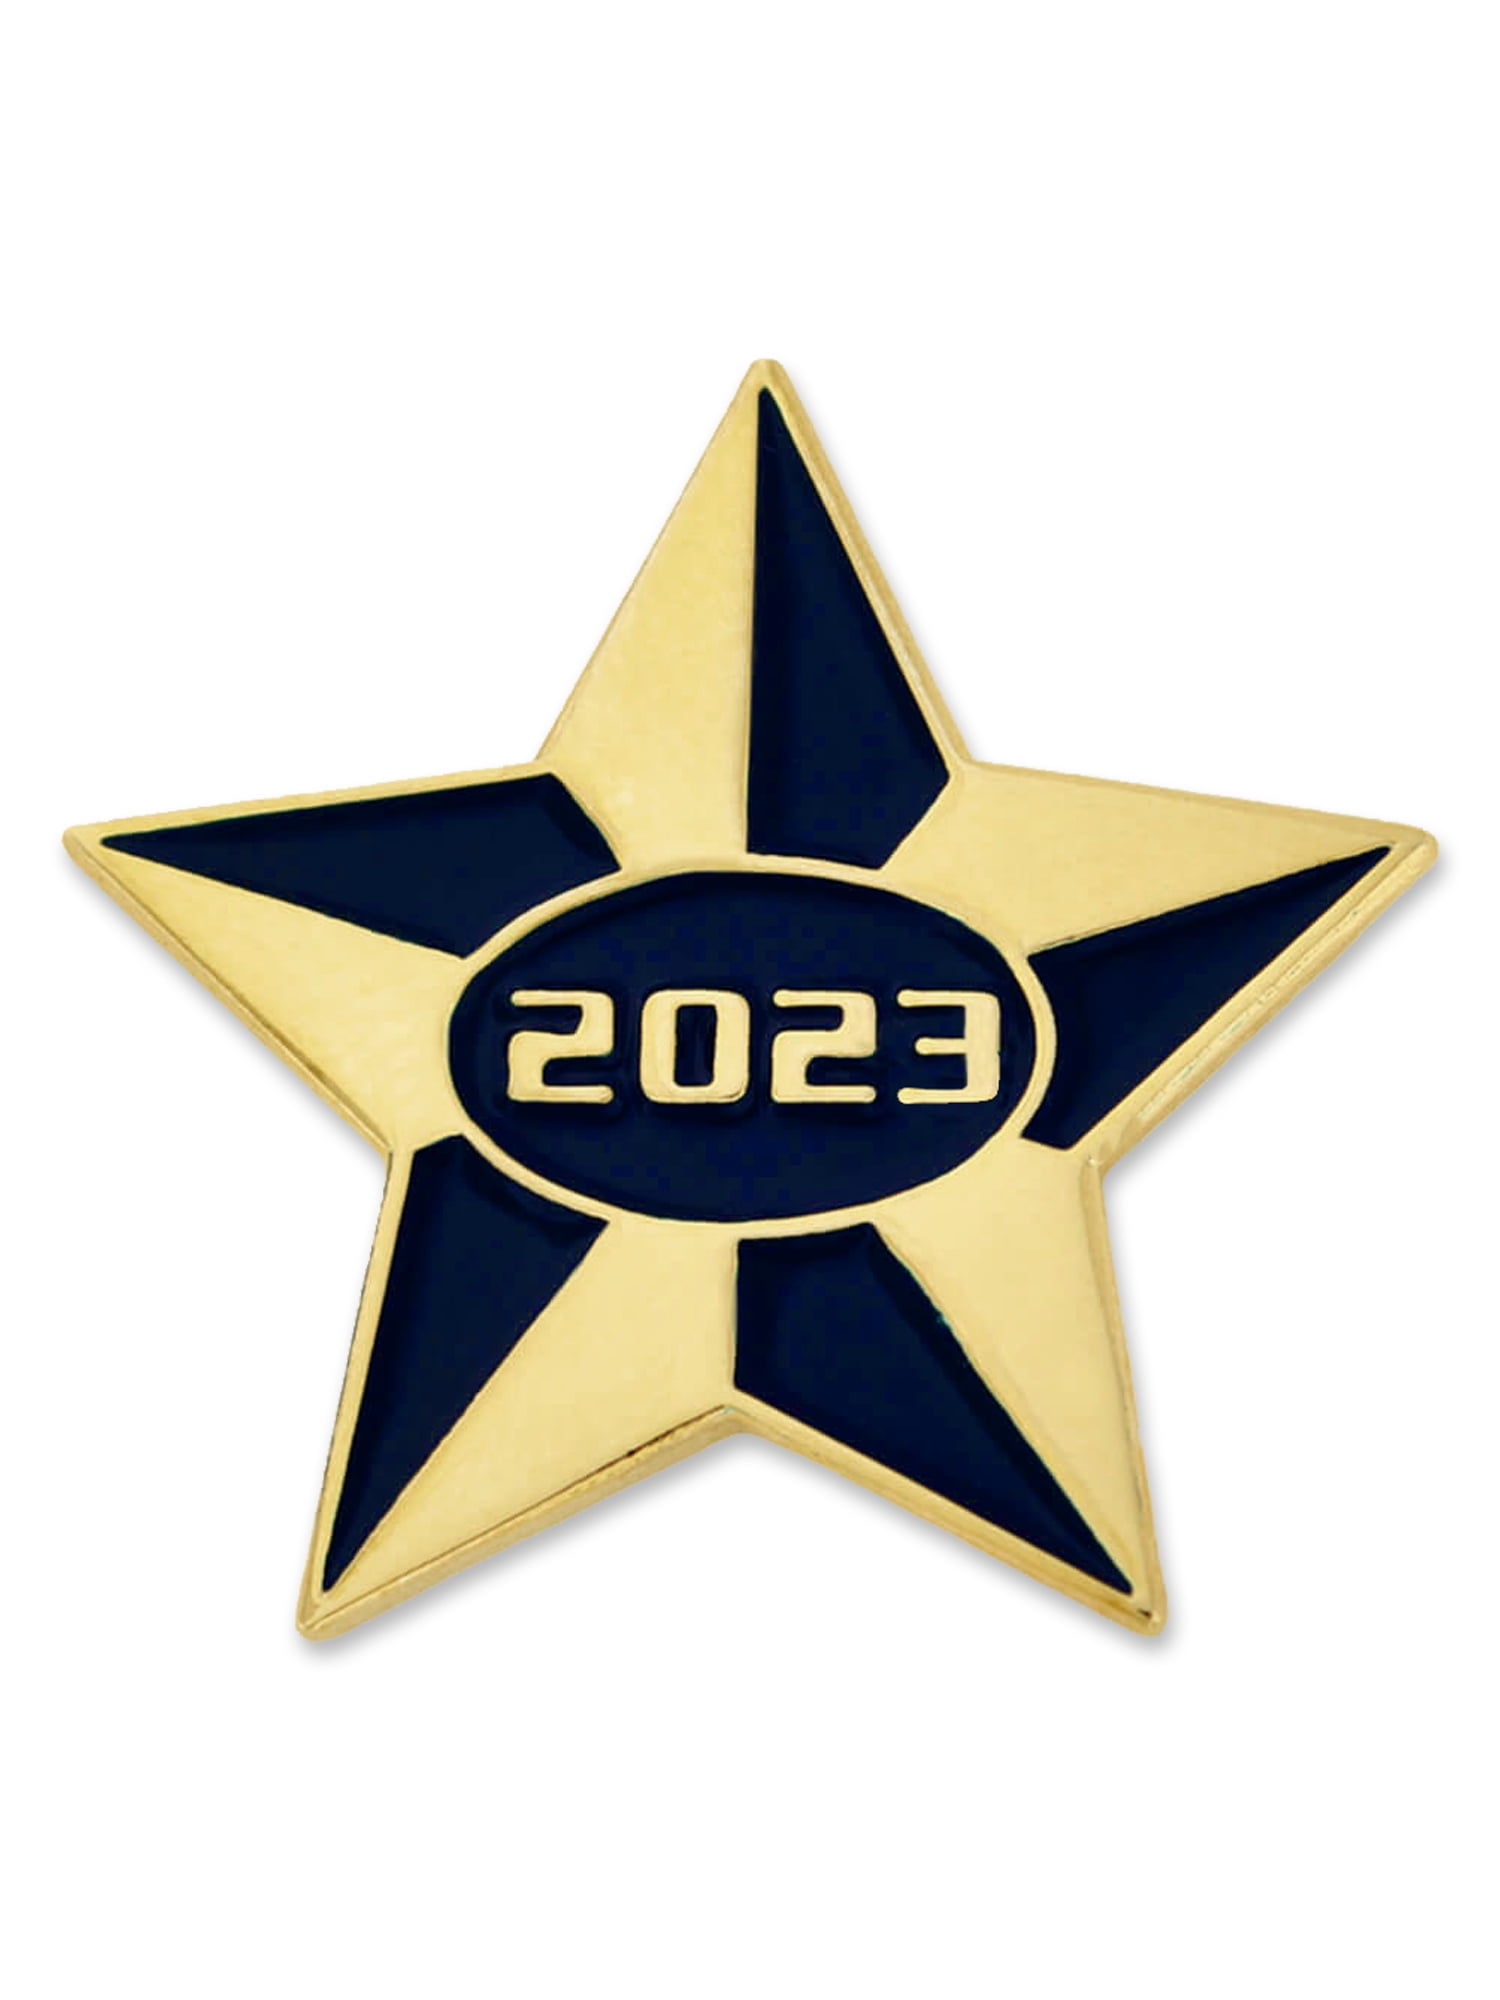 Pinmarts Class Of 2023 Blue And Gold Star School Graduation Ceremony